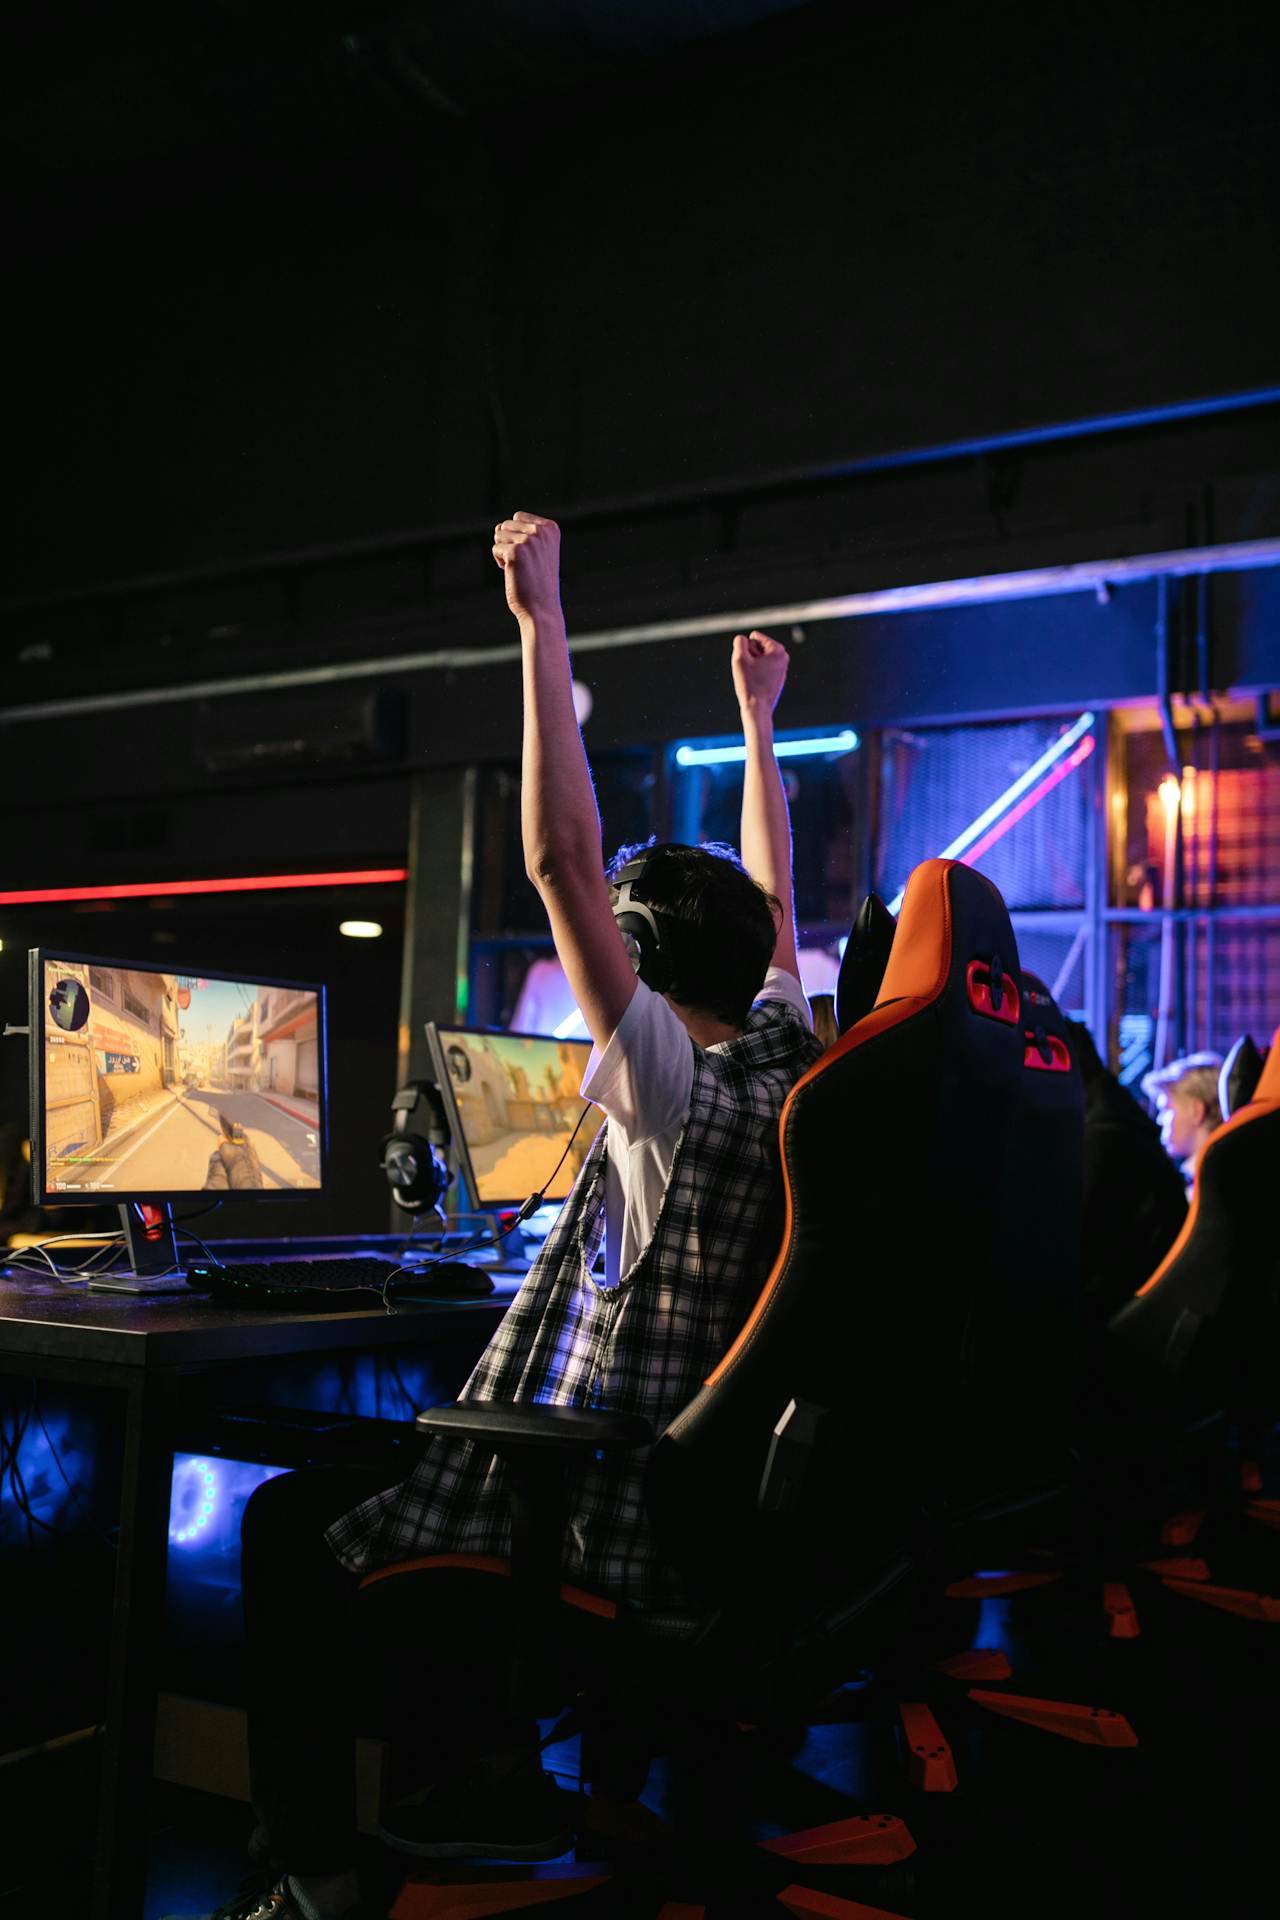 Gamer celebrating a victory at a computer gaming station with a custom-built gaming computer.